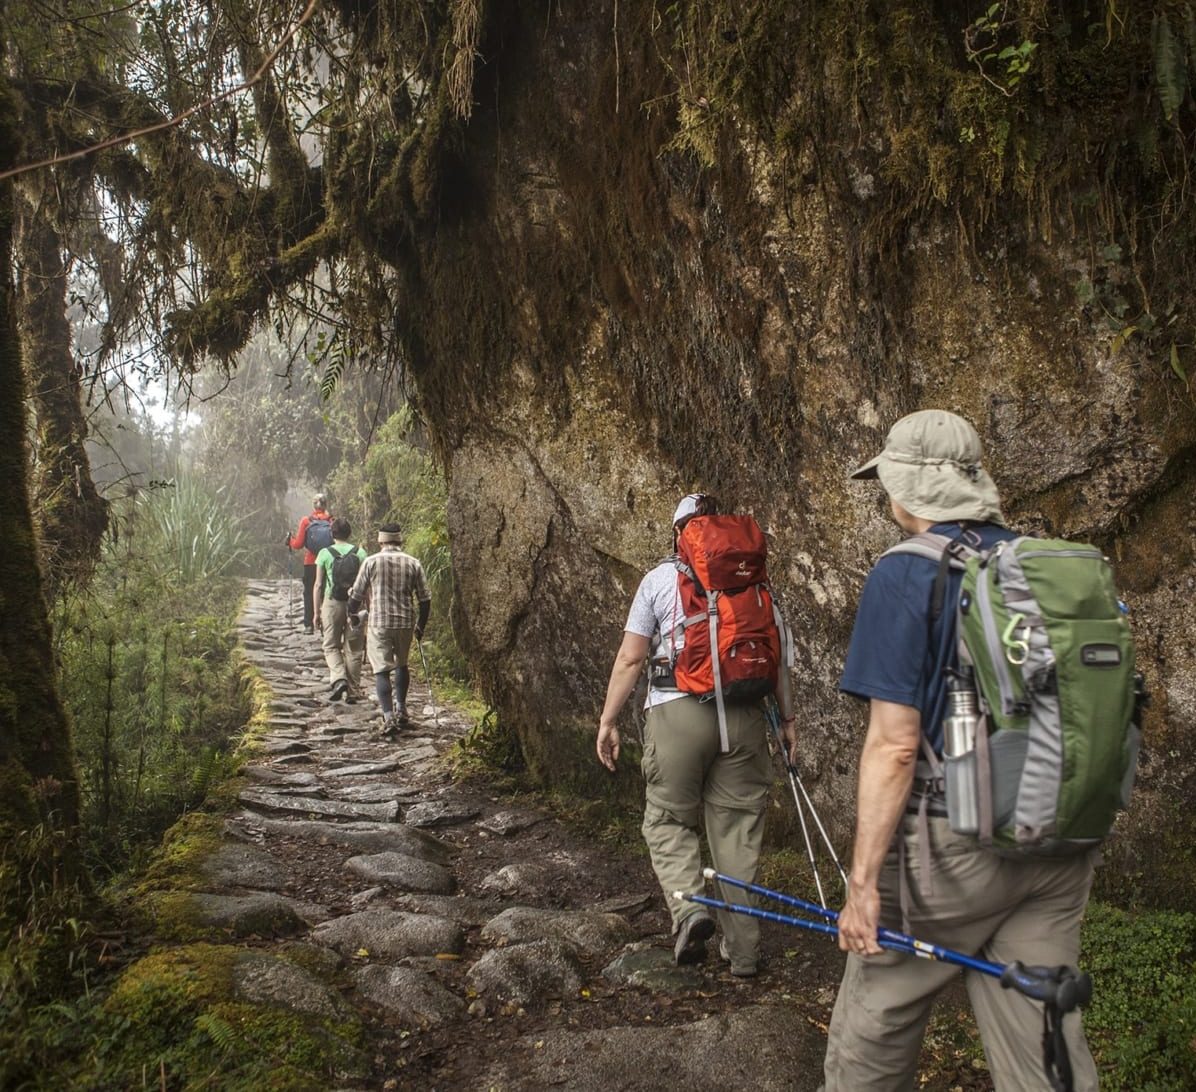 A photo of several hikers with backpacks walking on a stone path on the Inca Trail to Machu Picchu. There is a moss-laden branch hanging above them